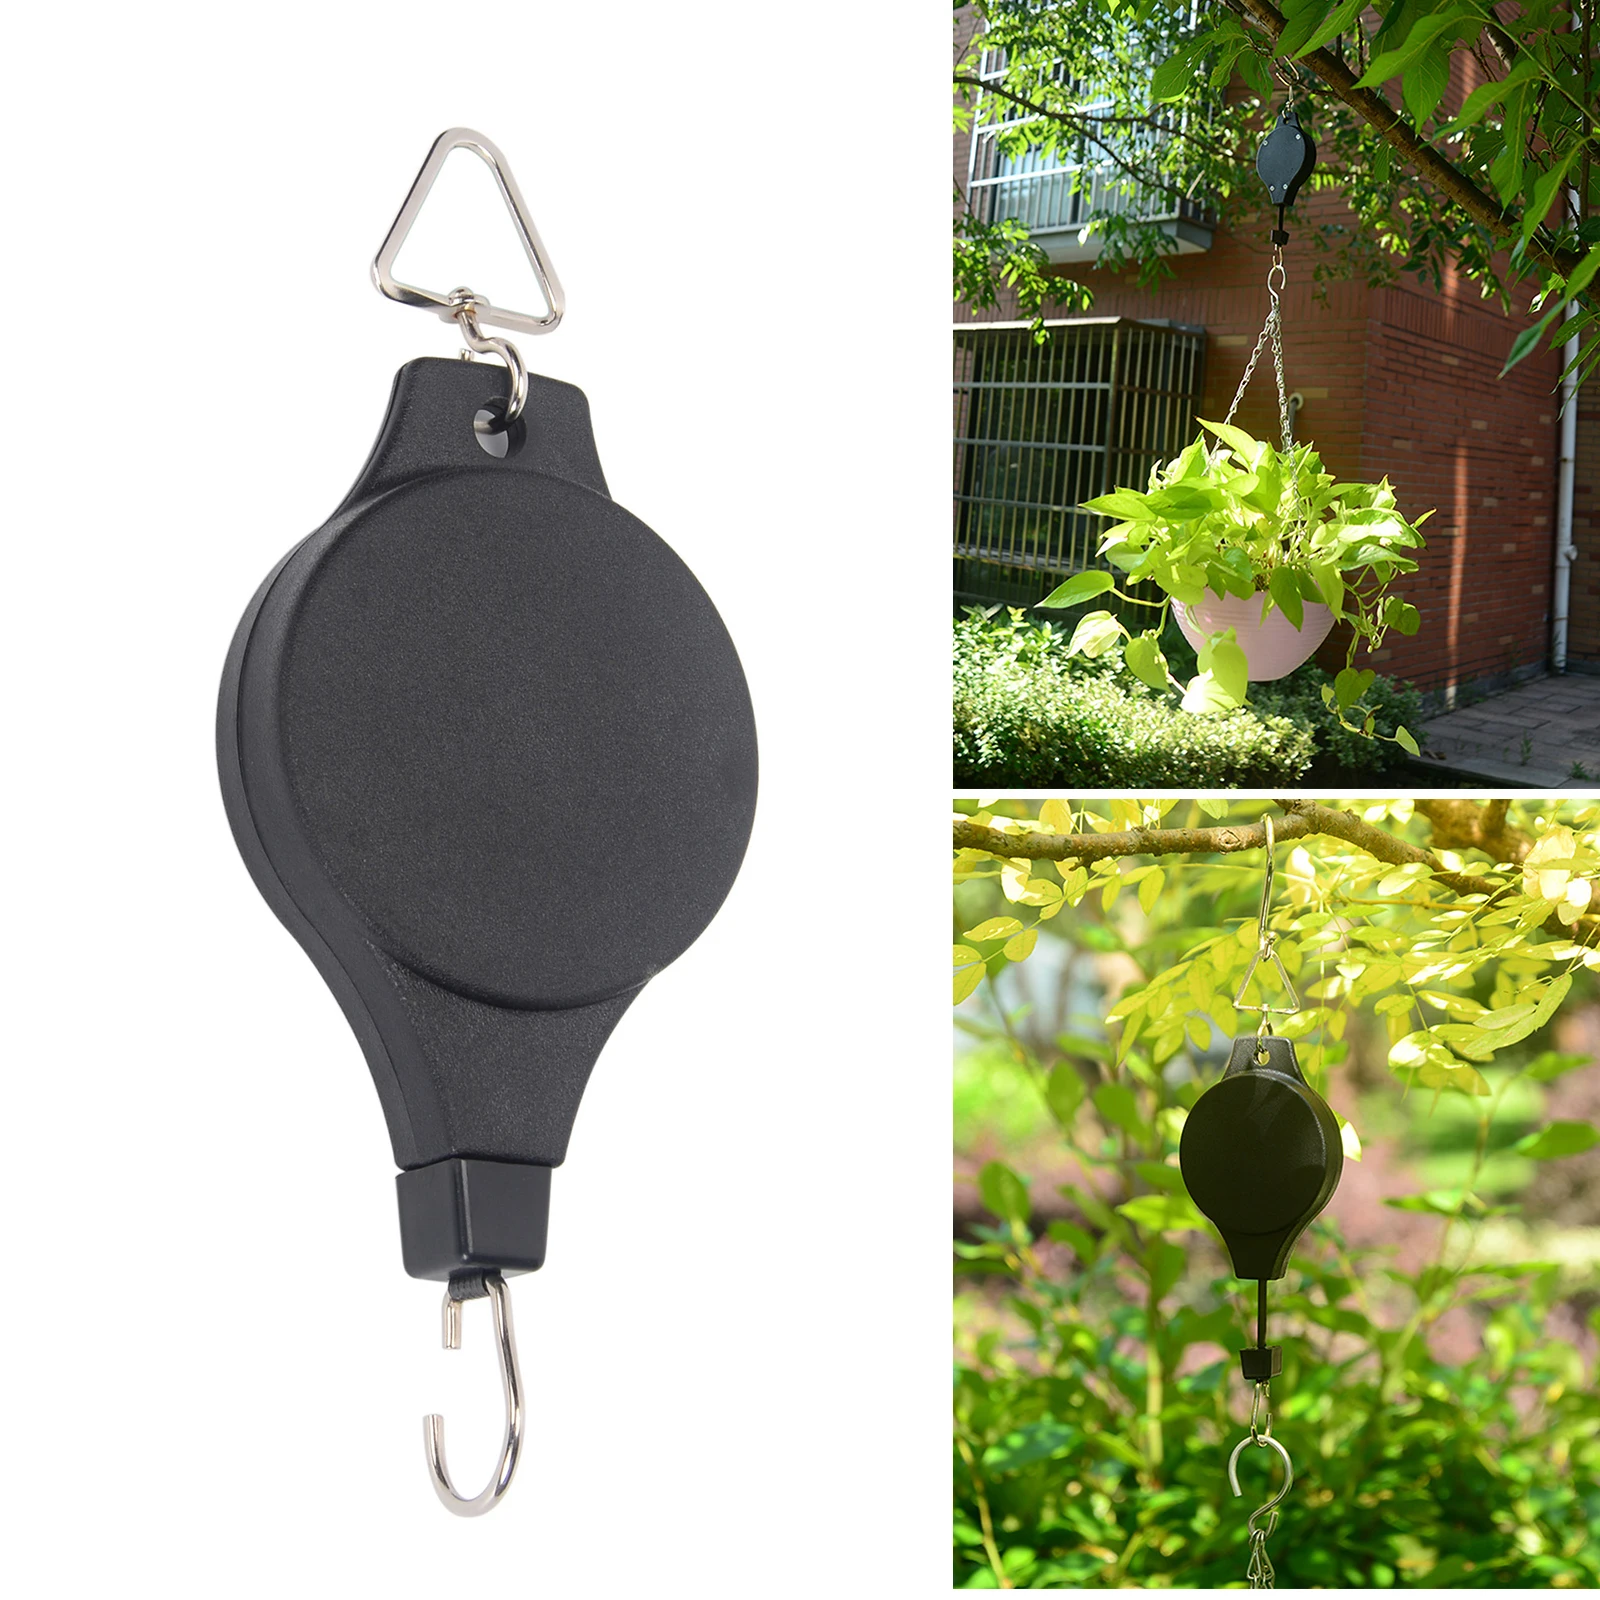 

Plant Hook Pulley Retractable Plant Hanger Pull Down Hanging Flower Basket for Garden Baskets Pots and Birds Feeder